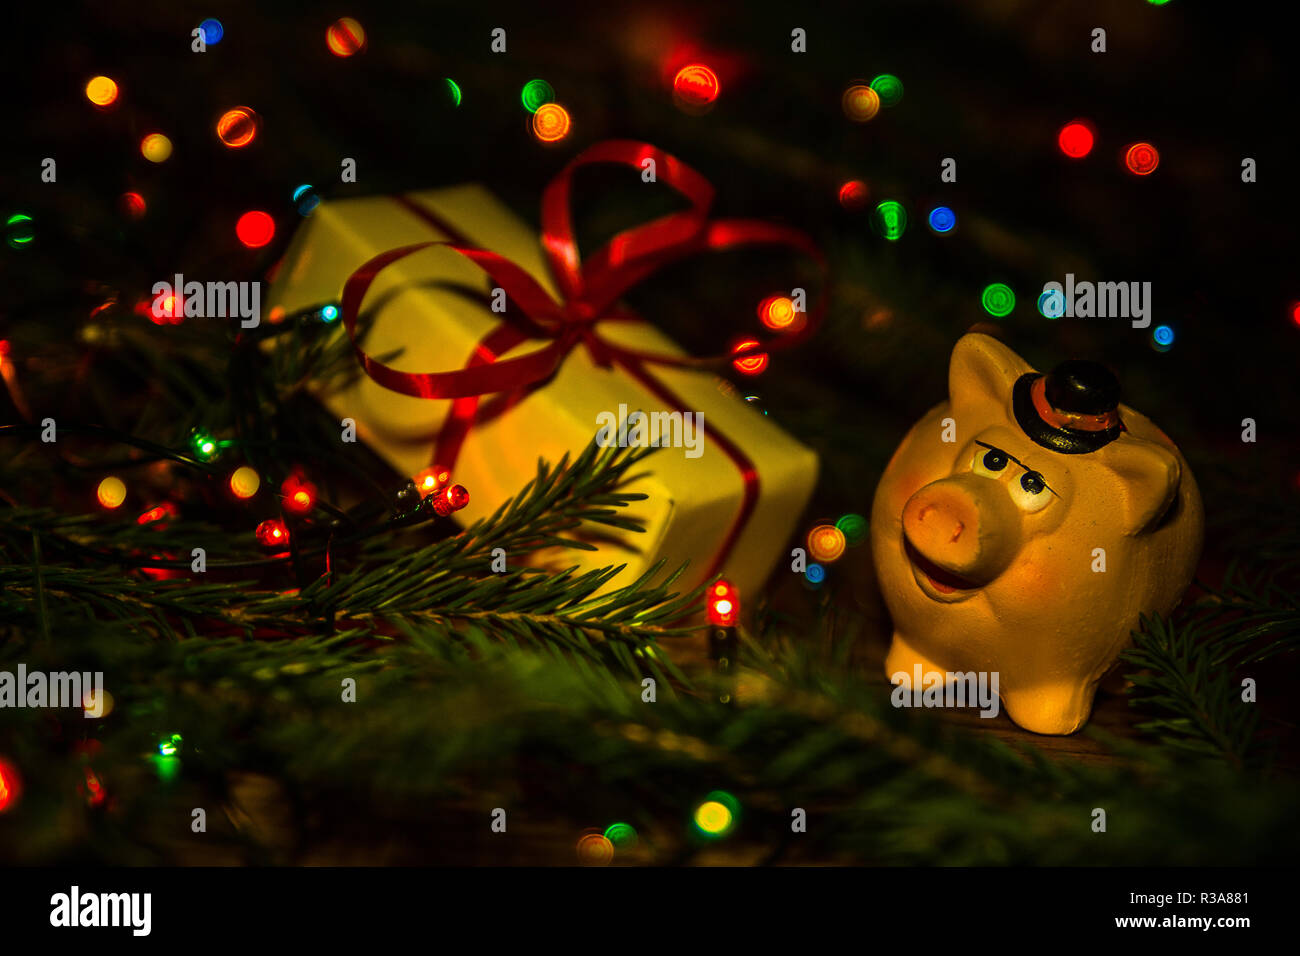 The New Year 2019 is the year of the pig. Stock Photo